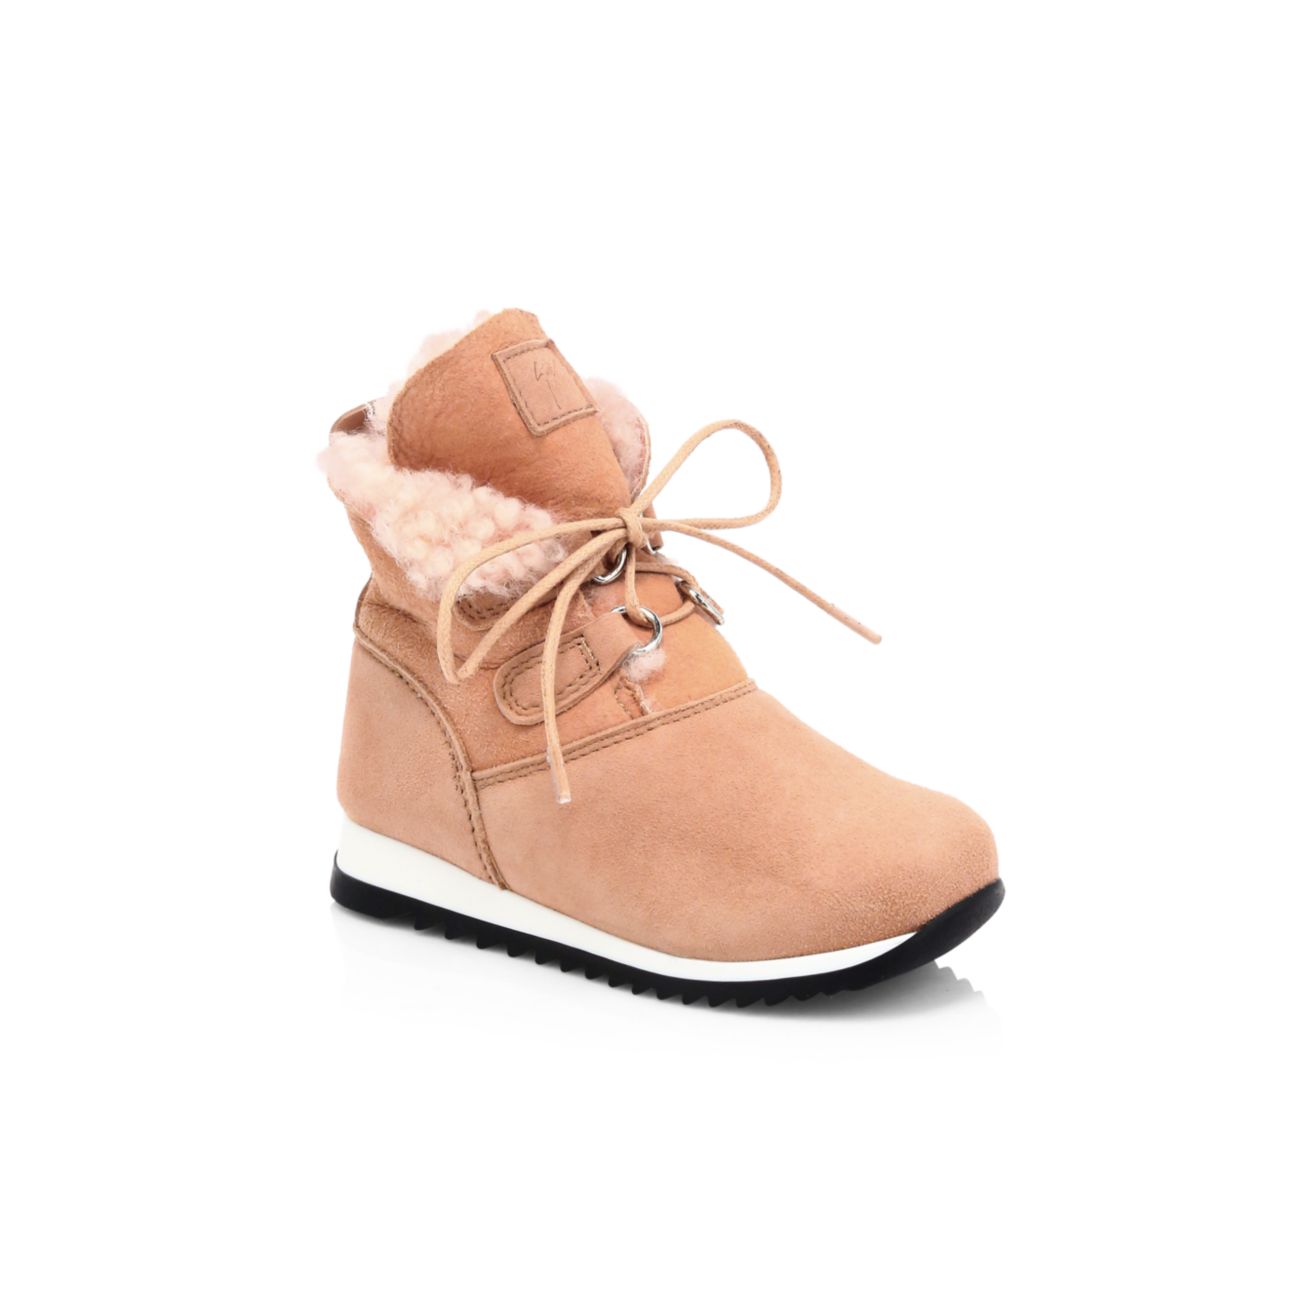 Baby's &amp; Little Boy's Sunrise Suede Shearling-Lined Boots Giuseppe Zanotti